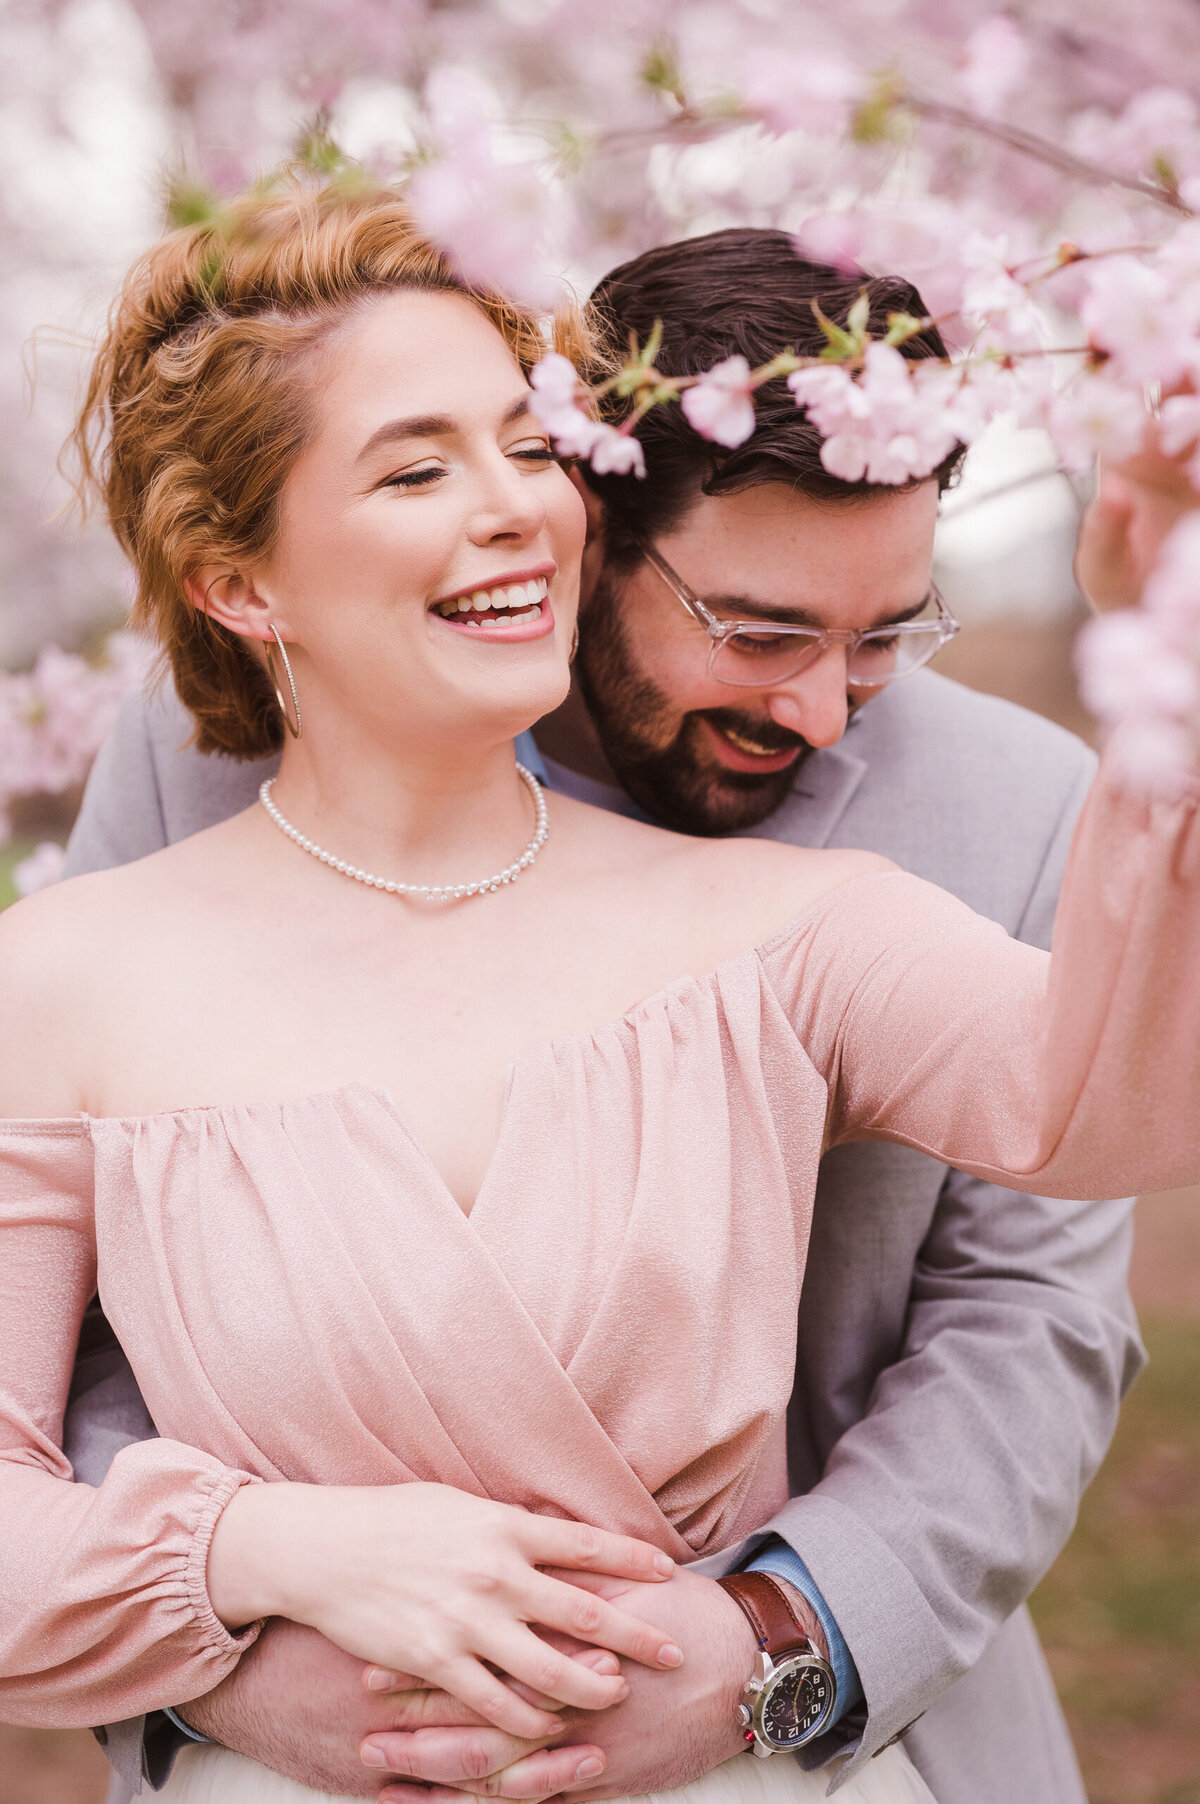 spring-branch-brook-park-new-jersey-cherry-blossom-engagement-photos-suess-moments